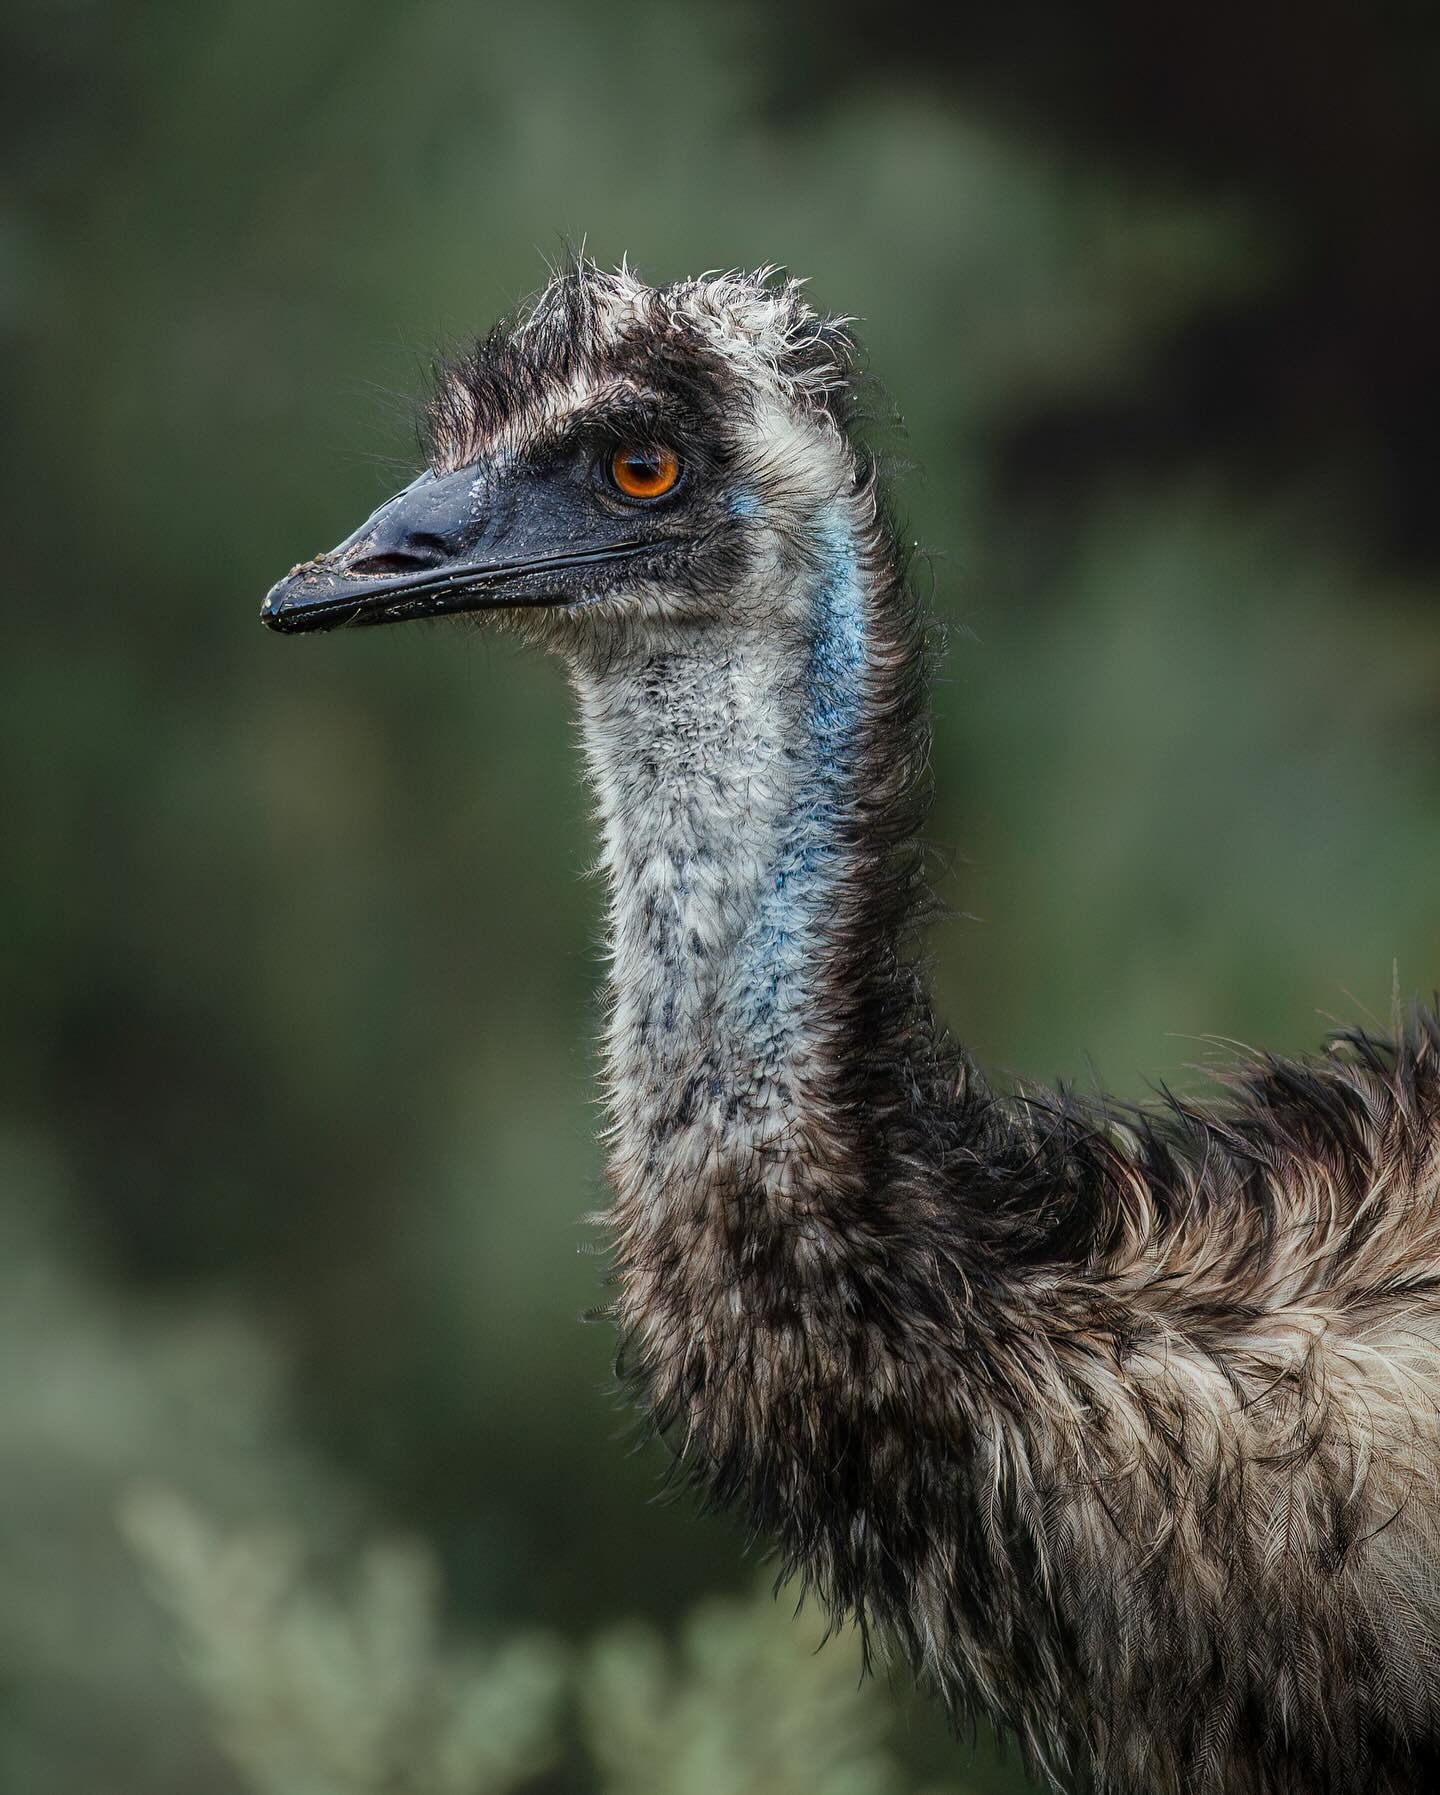 A very unique emu (swipe to compare) 🤍🪶

&mdash; On a recent trip down to Wilsons Prom, we came across a mob of 6 emus that were grazing together in an open field. This particular adult quickly caught my attention due to its strip of white feathers